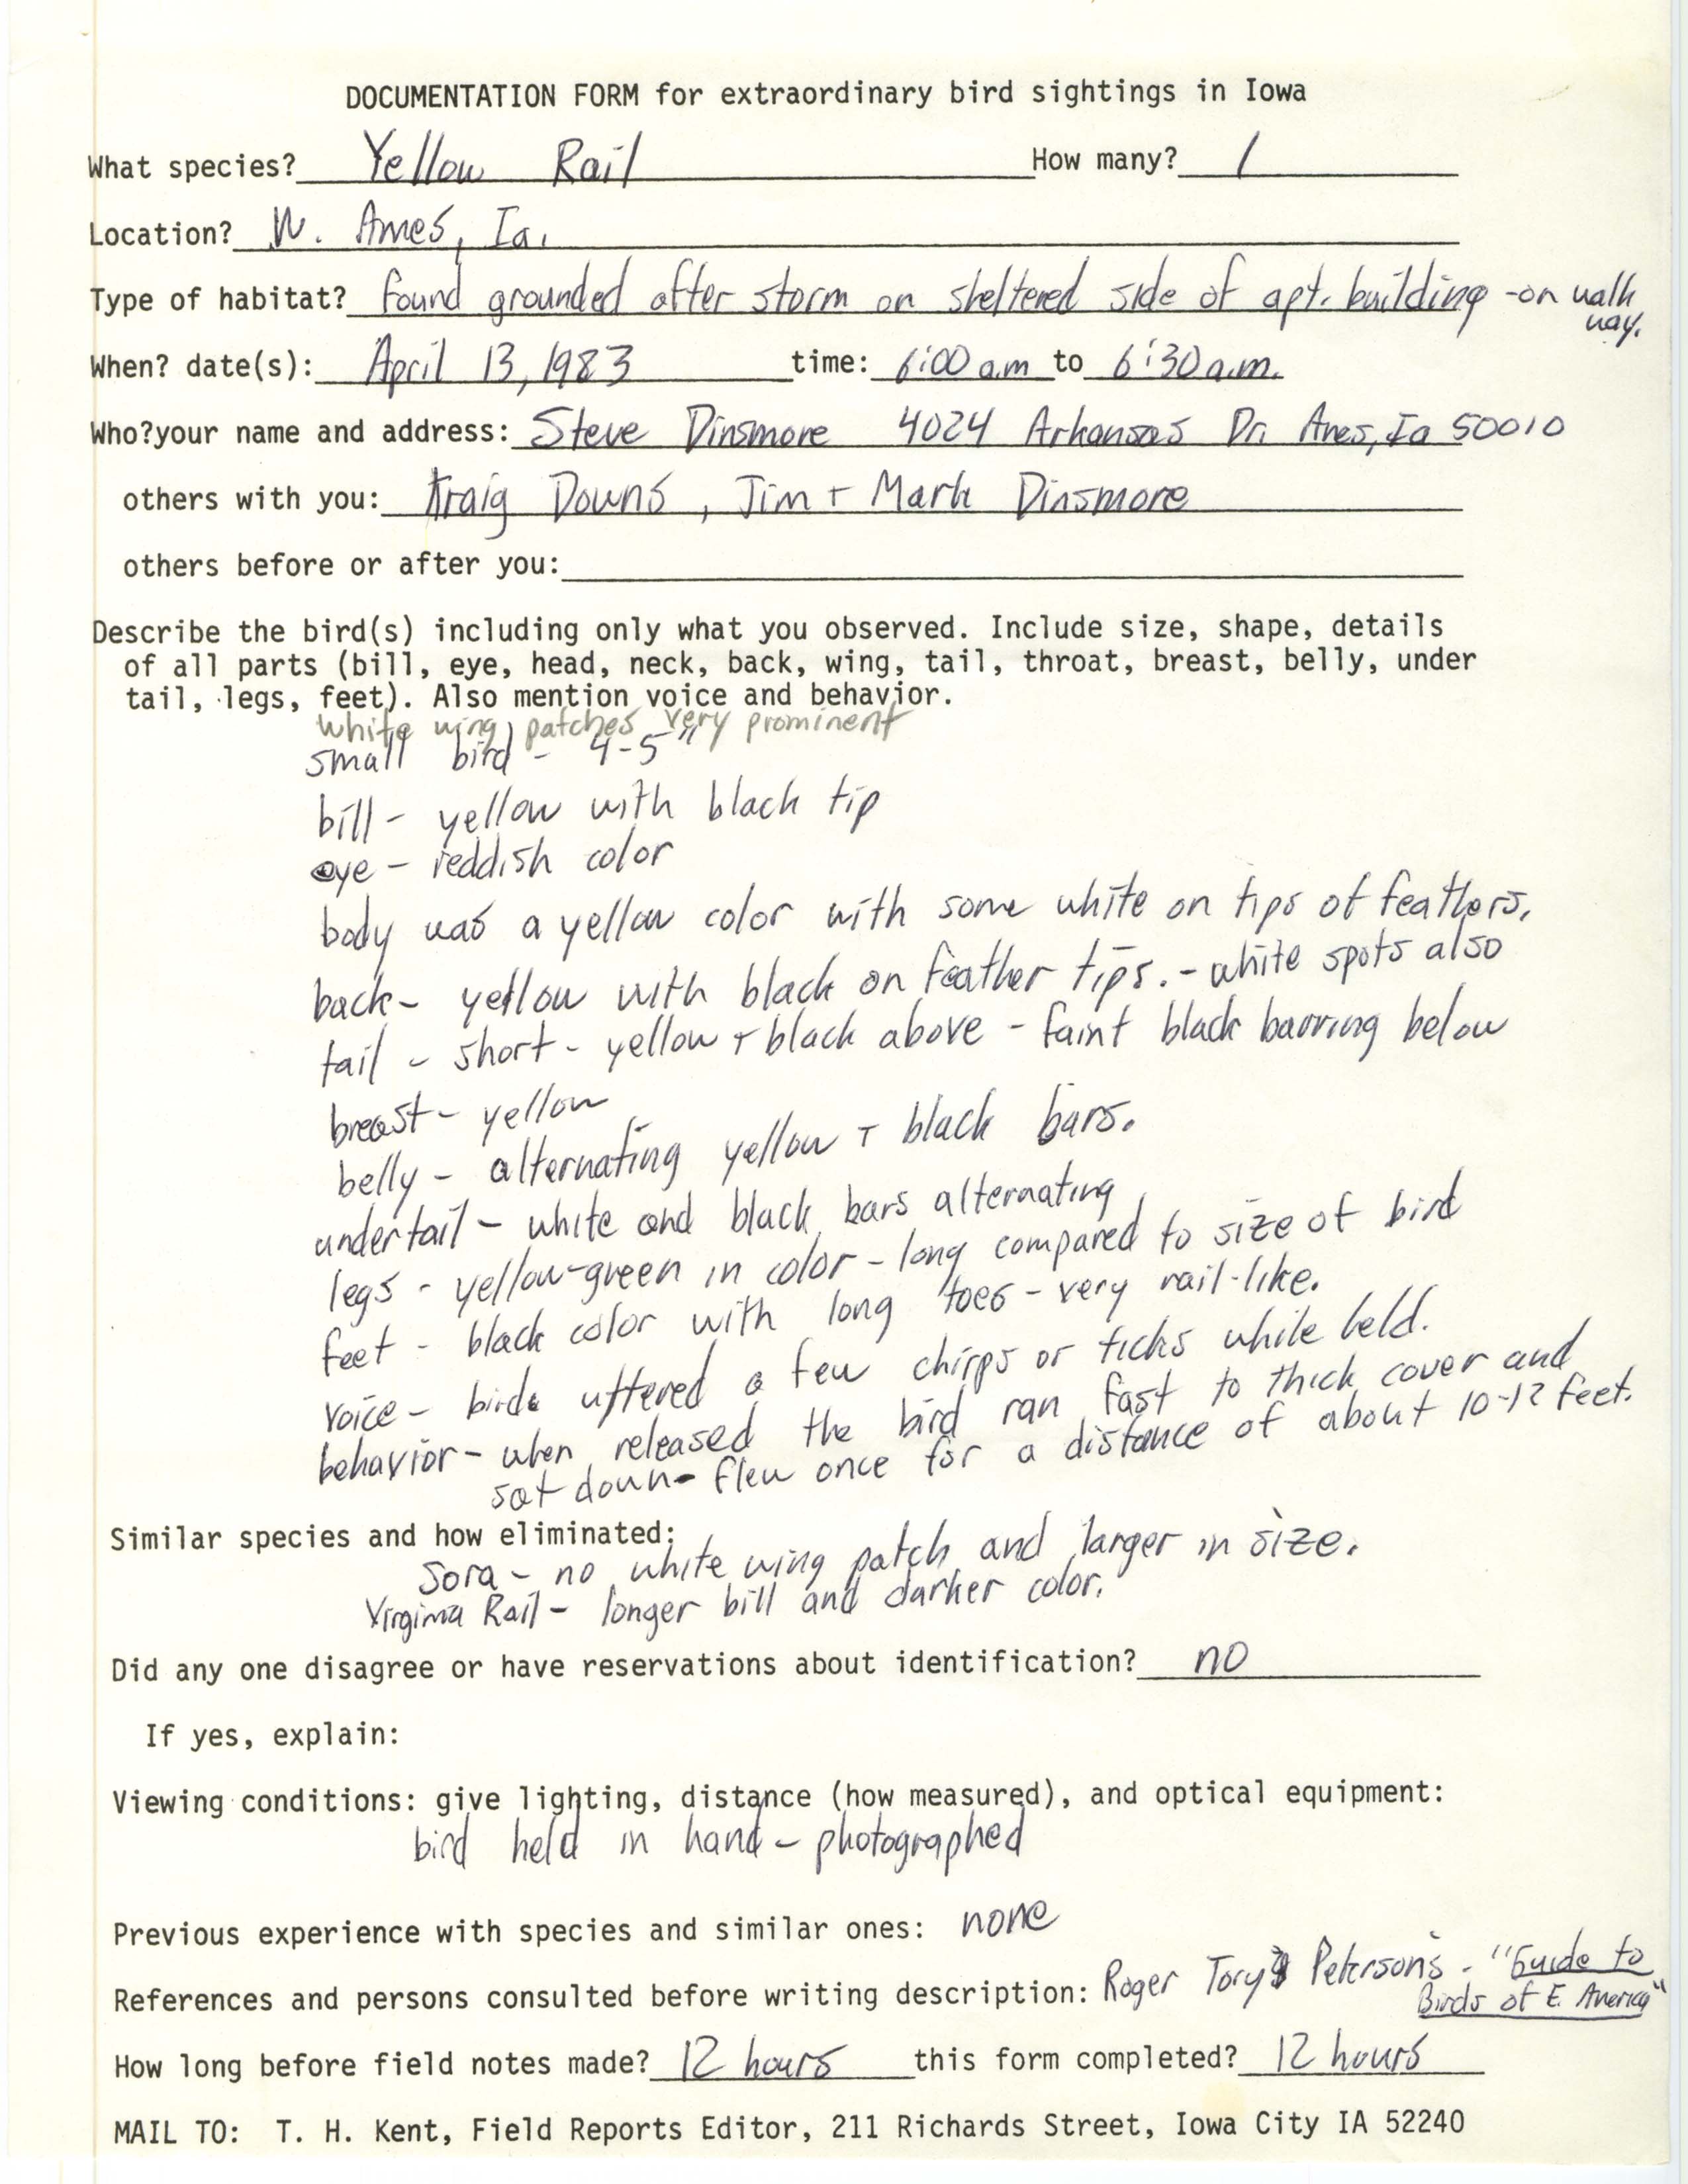 Rare bird documentation form for Yellow Rail at Ames, 1983